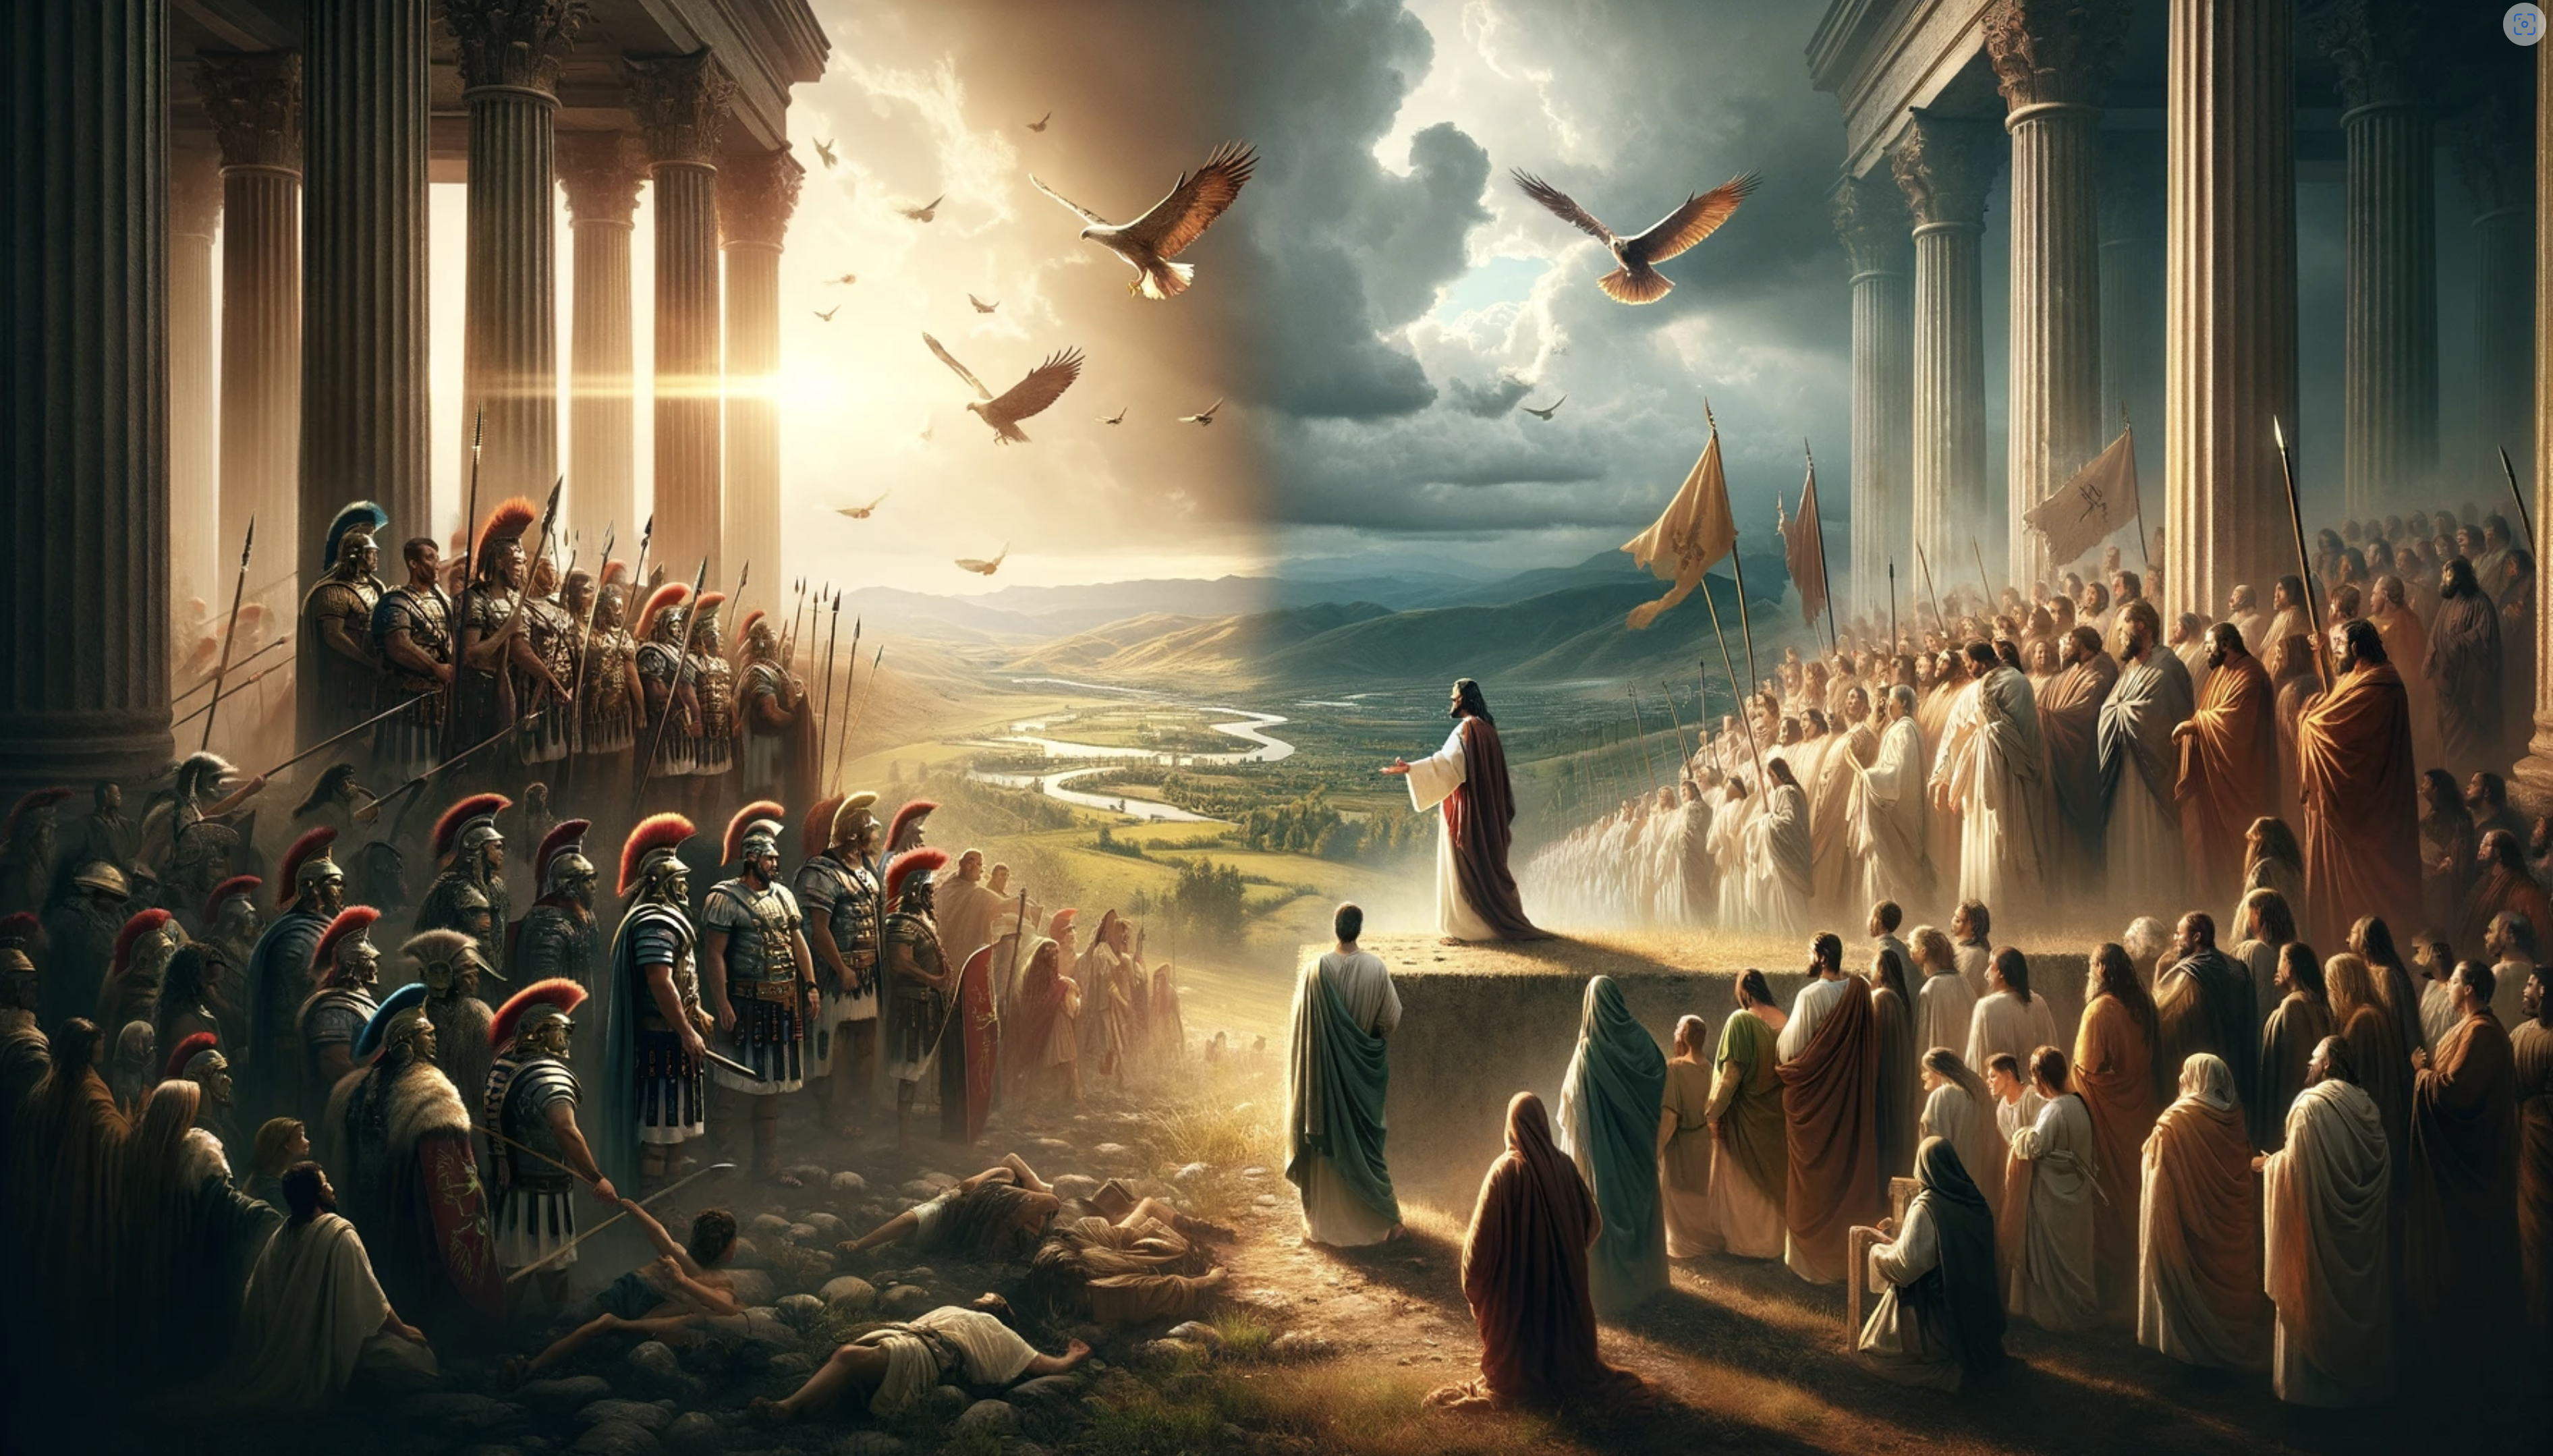 Jesus, standing in front of a large crowd of his disciples, faces a Roman Army.